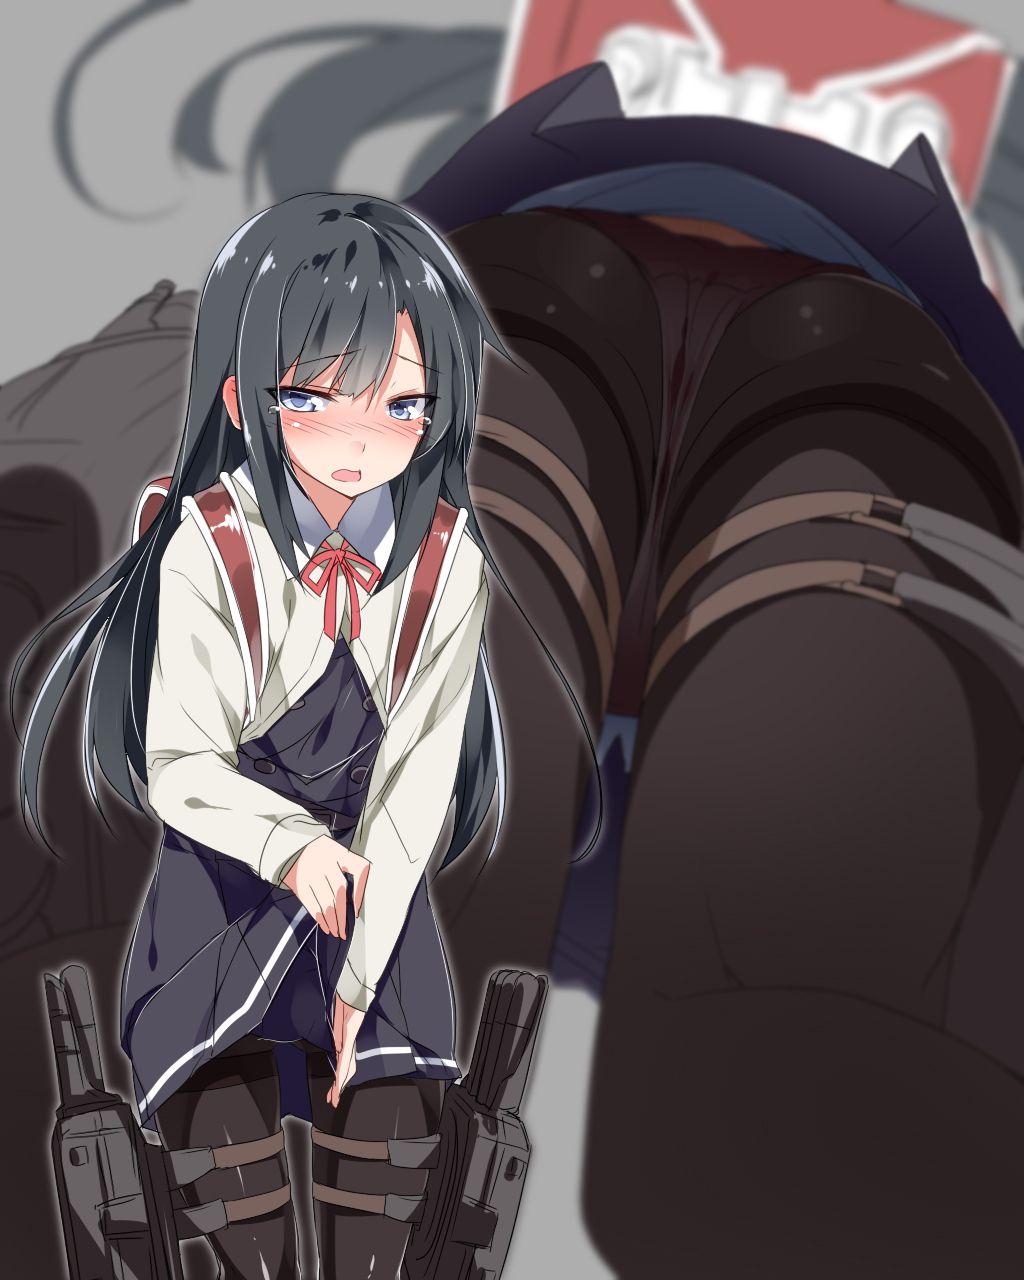 [Secondary, ZIP] pretty serious ship it together images of asashio 100 53